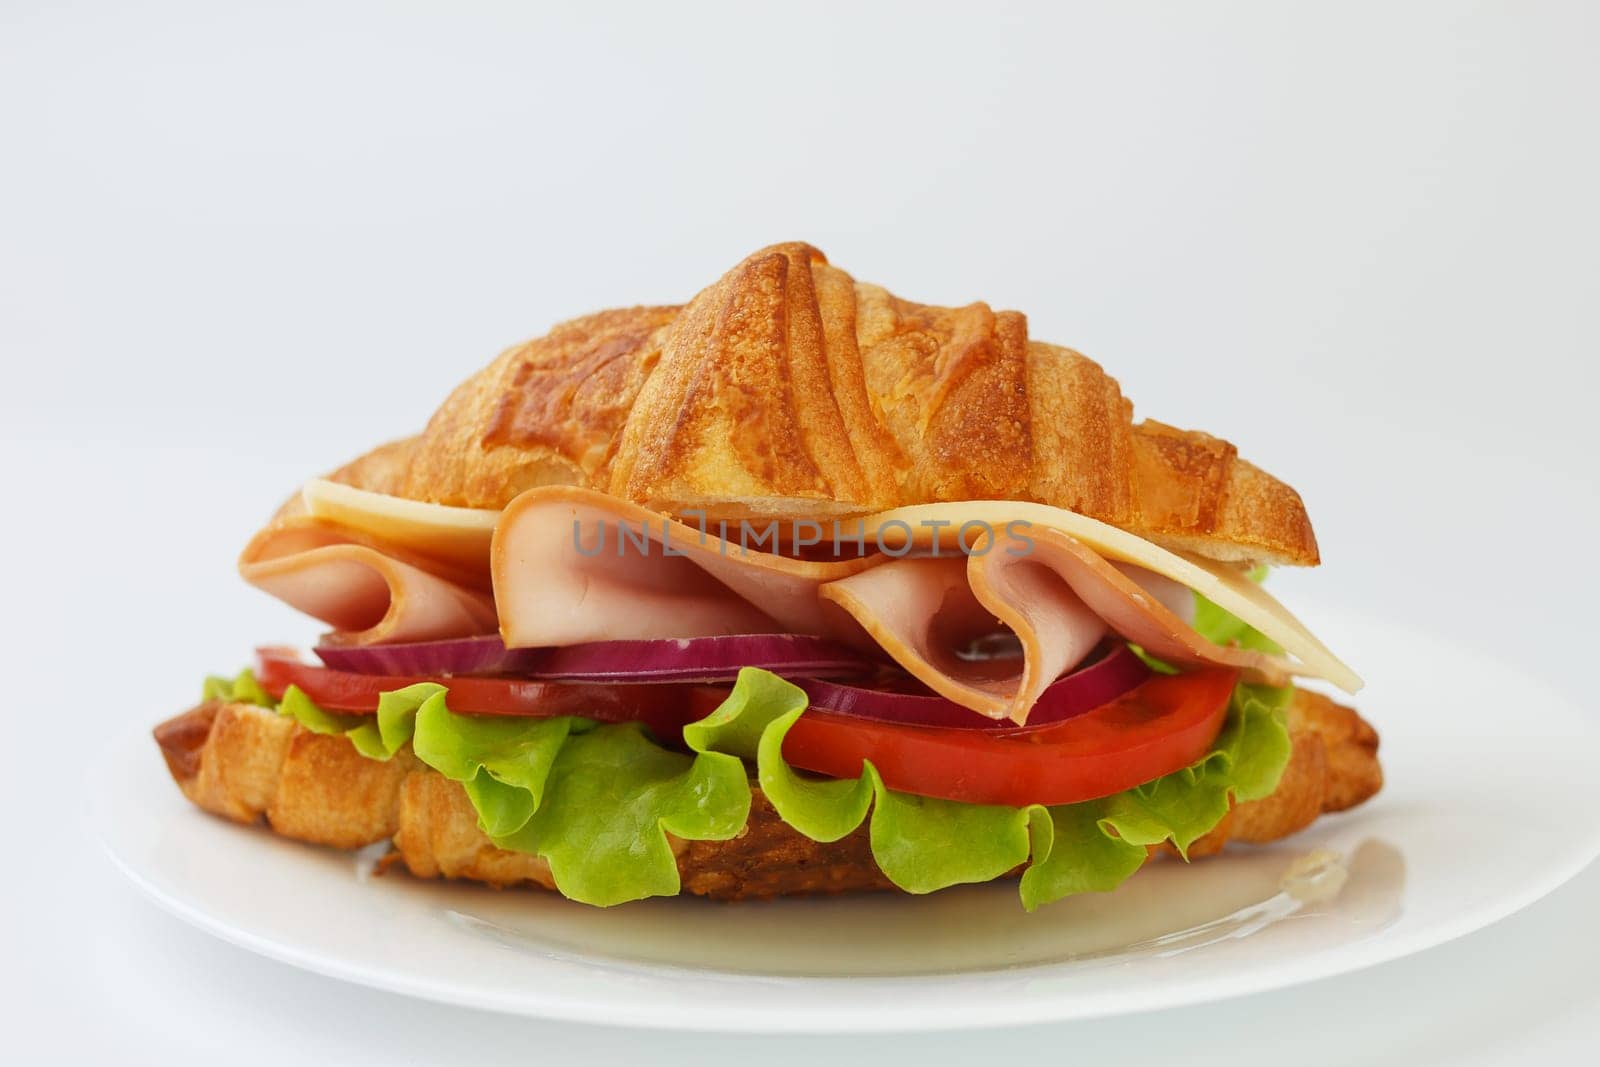 Croissant sandwich with ham, cheese, tomato and lettuce on white background by lara29